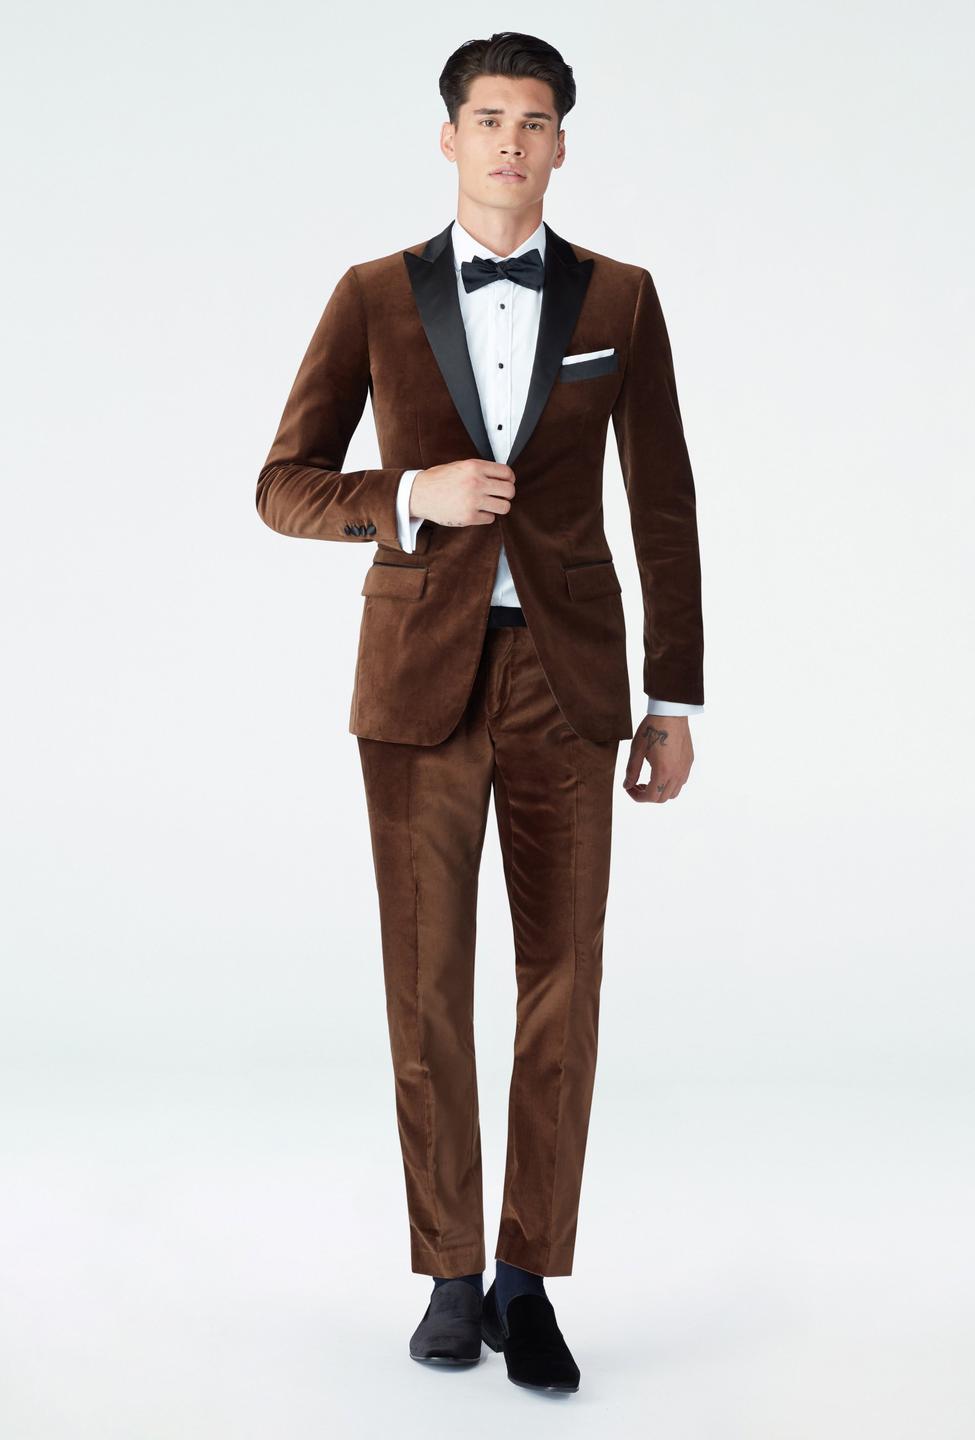 Brown suit - Hardford Solid Design from Tuxedo Indochino Collection